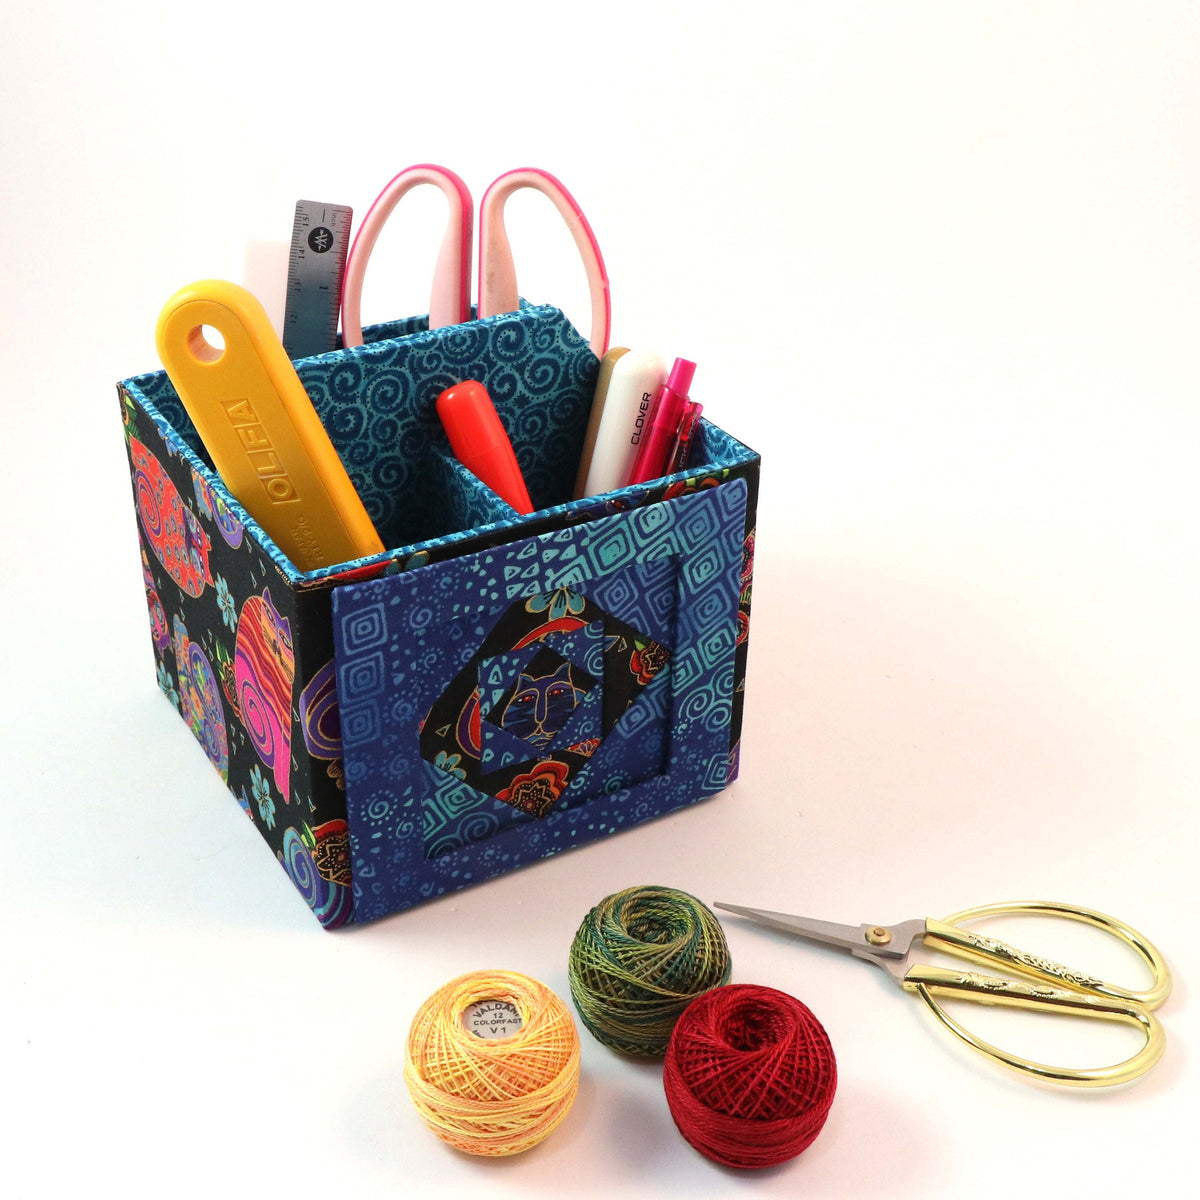 Fabric photo art caddy DIY kit, picture cube, photo caddy, cartonnage kit 185, Online instructions included - Colorway Arts